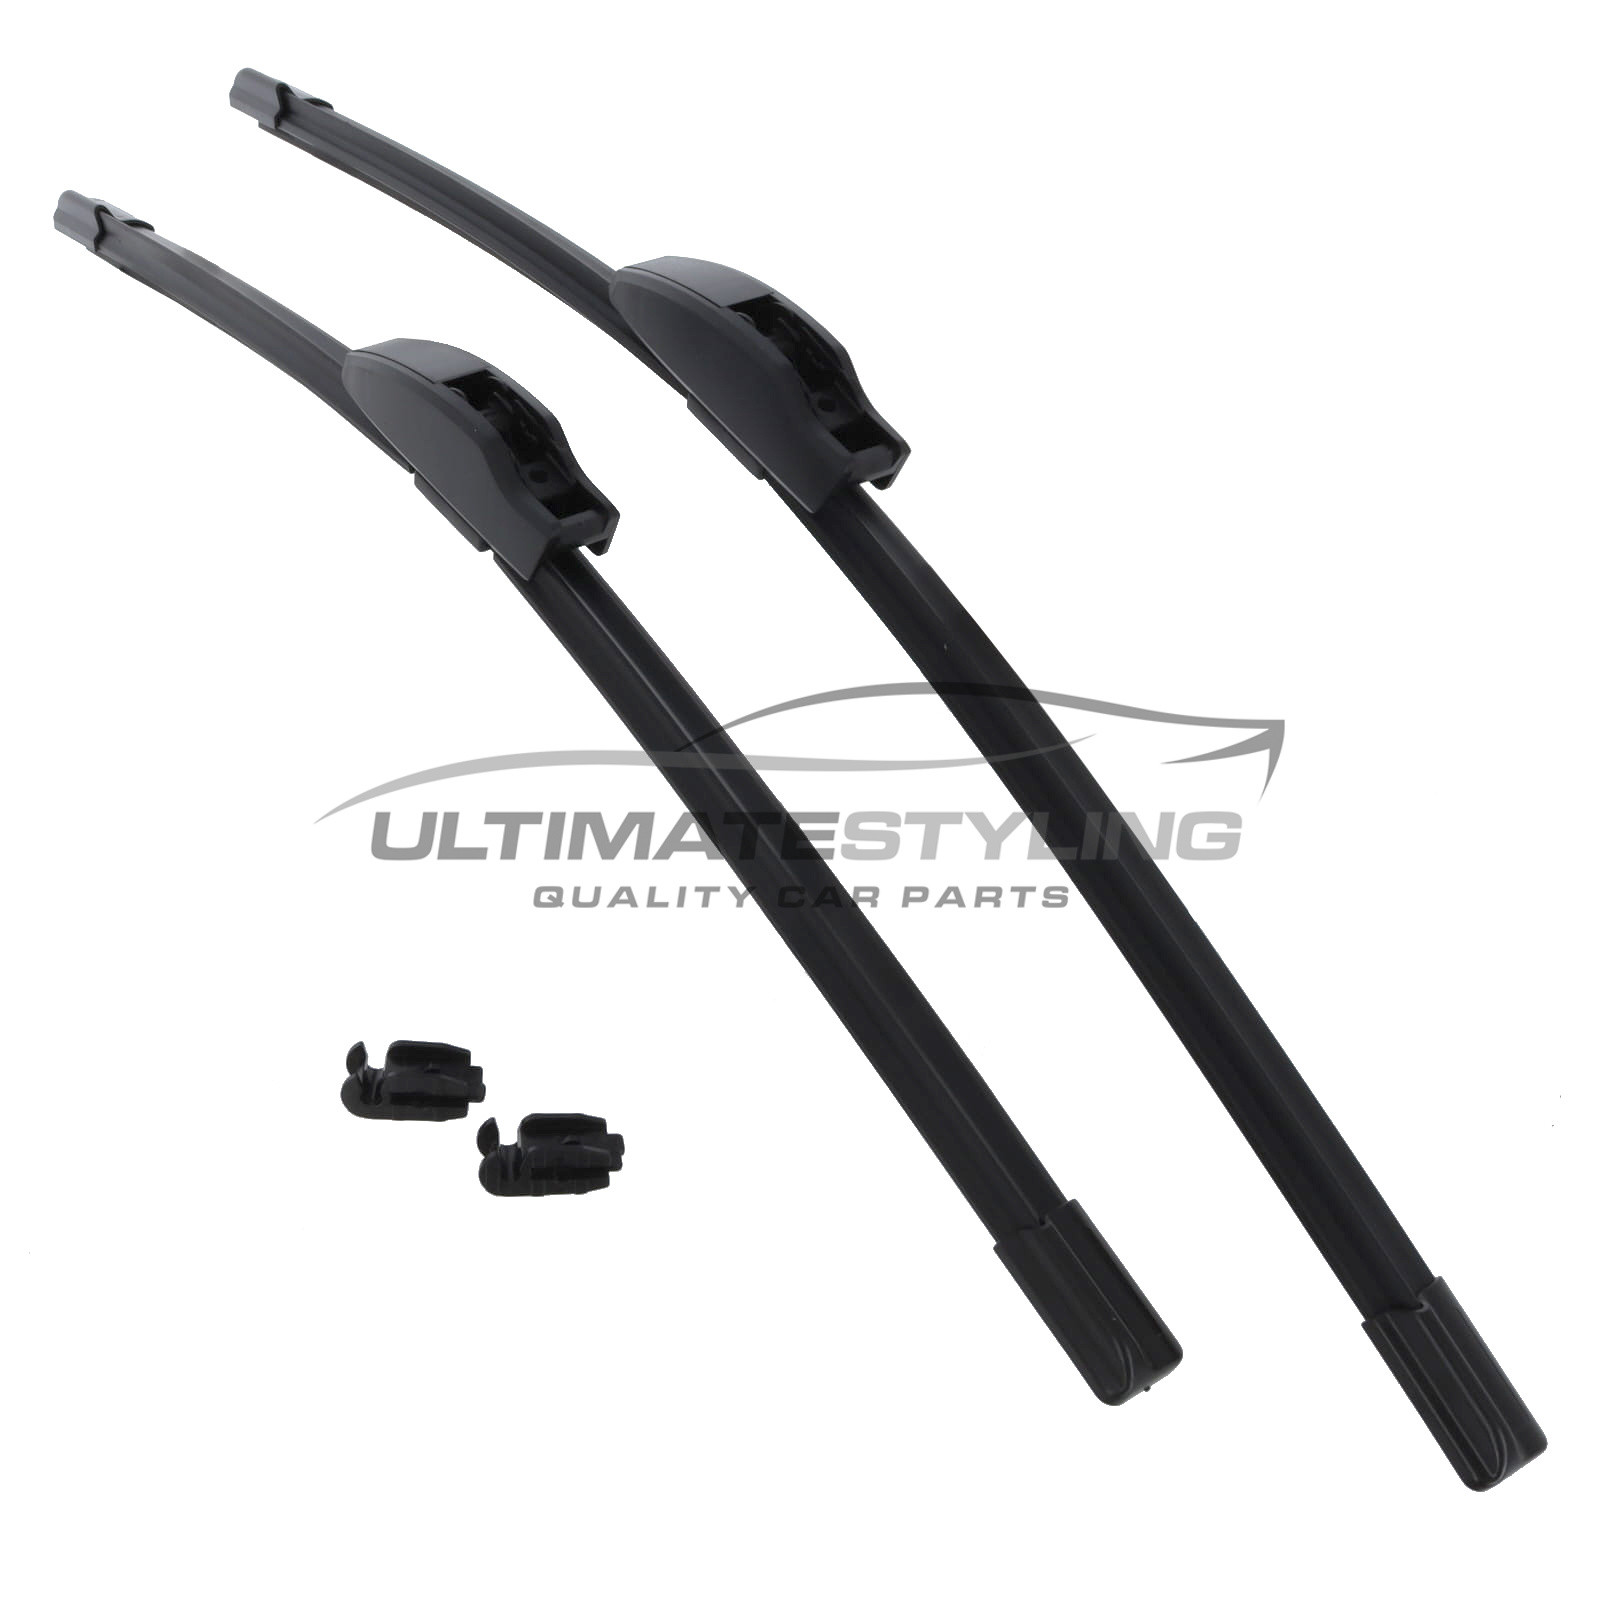 Drivers Side & Passenger Side (Front) Wiper Blades for Subaru Legacy